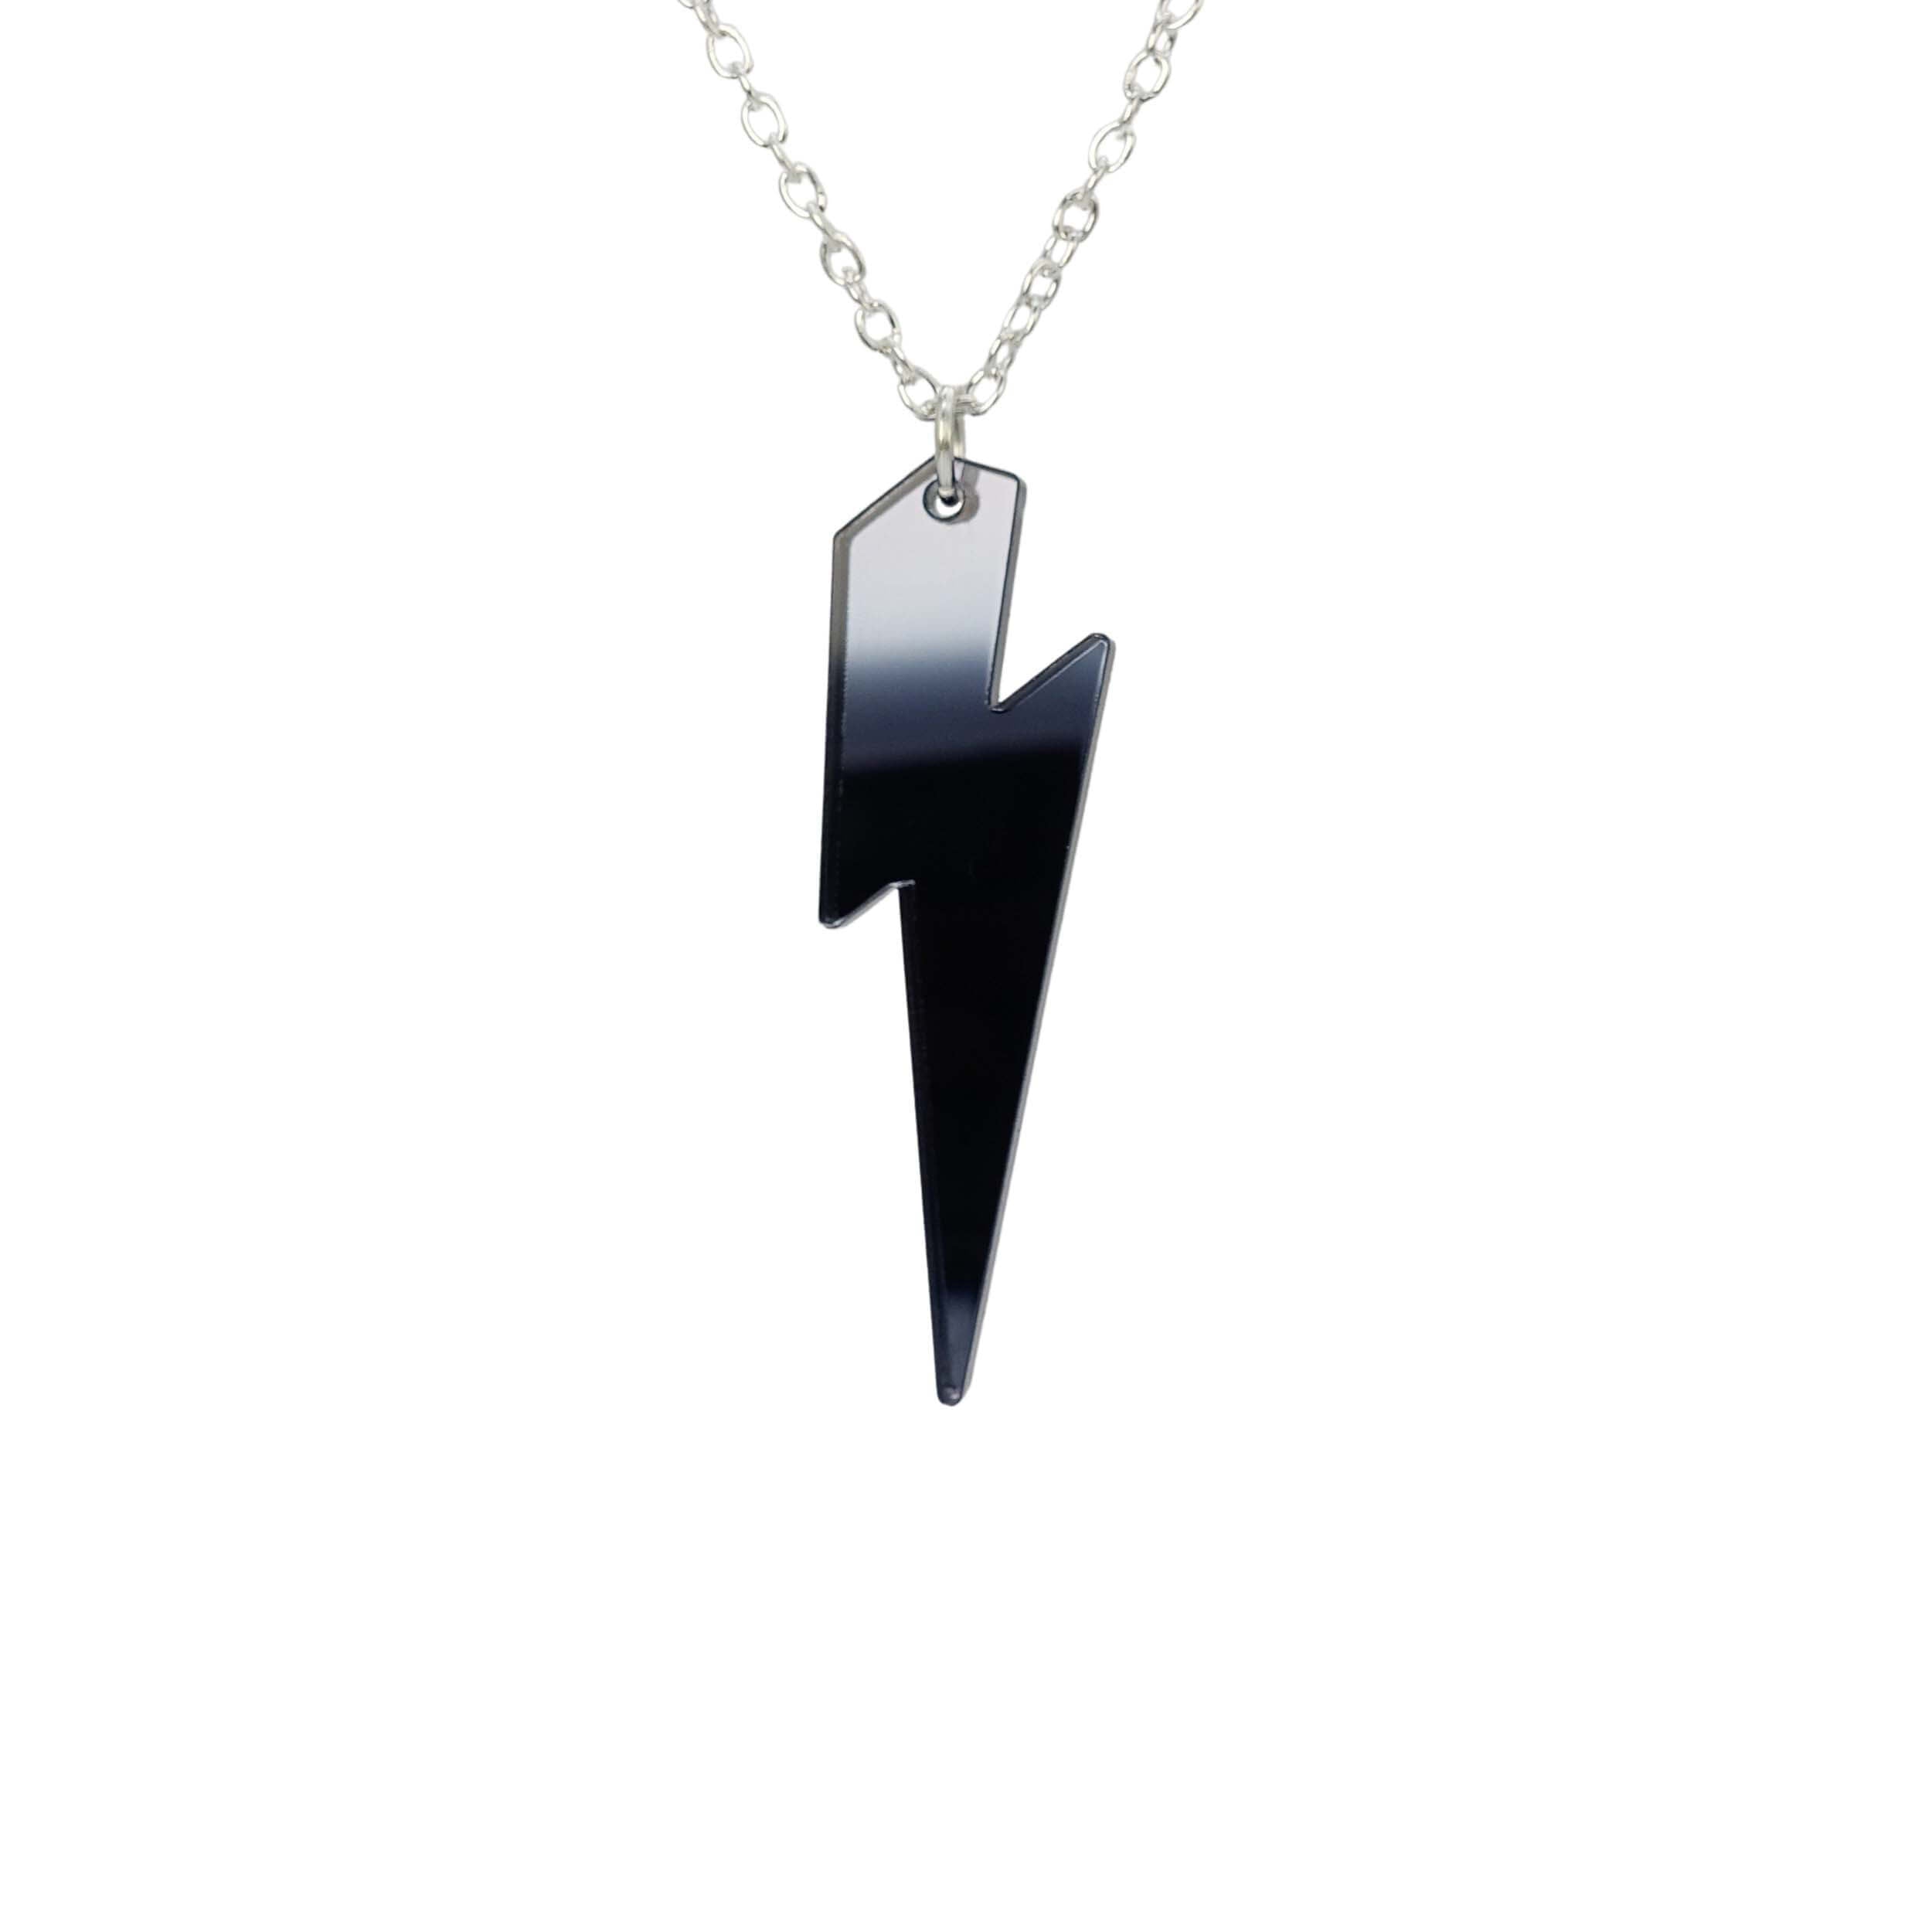 Slate mirror Lightning Bolt necklace shown hanging against a white background. 